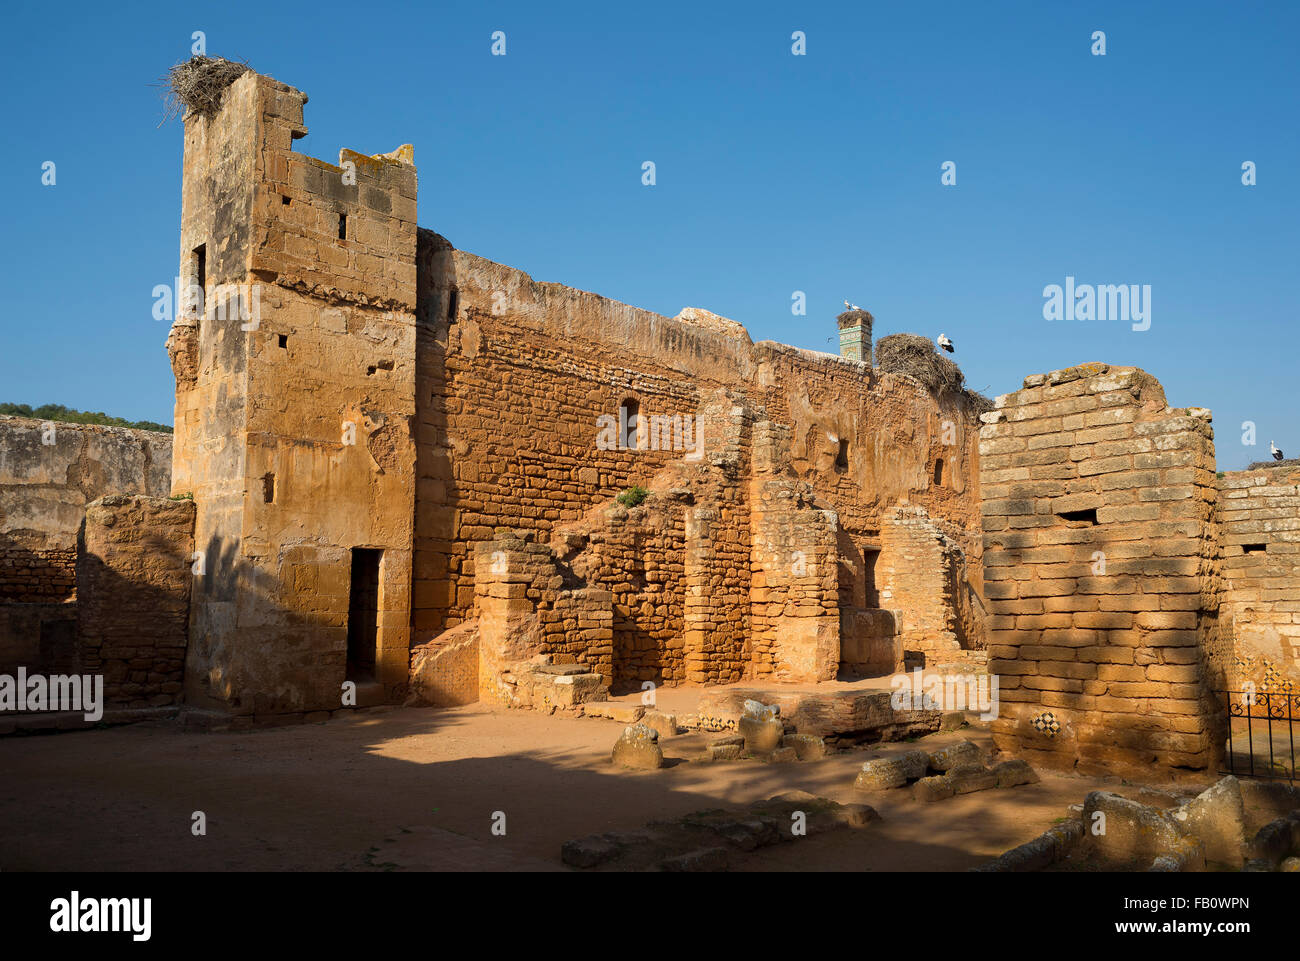 Remains of the Islamic complex of Chellah. Mosque ruined. Chellah or Sala Colonia is the necropolis of Rabat. Morocco. Stock Photo